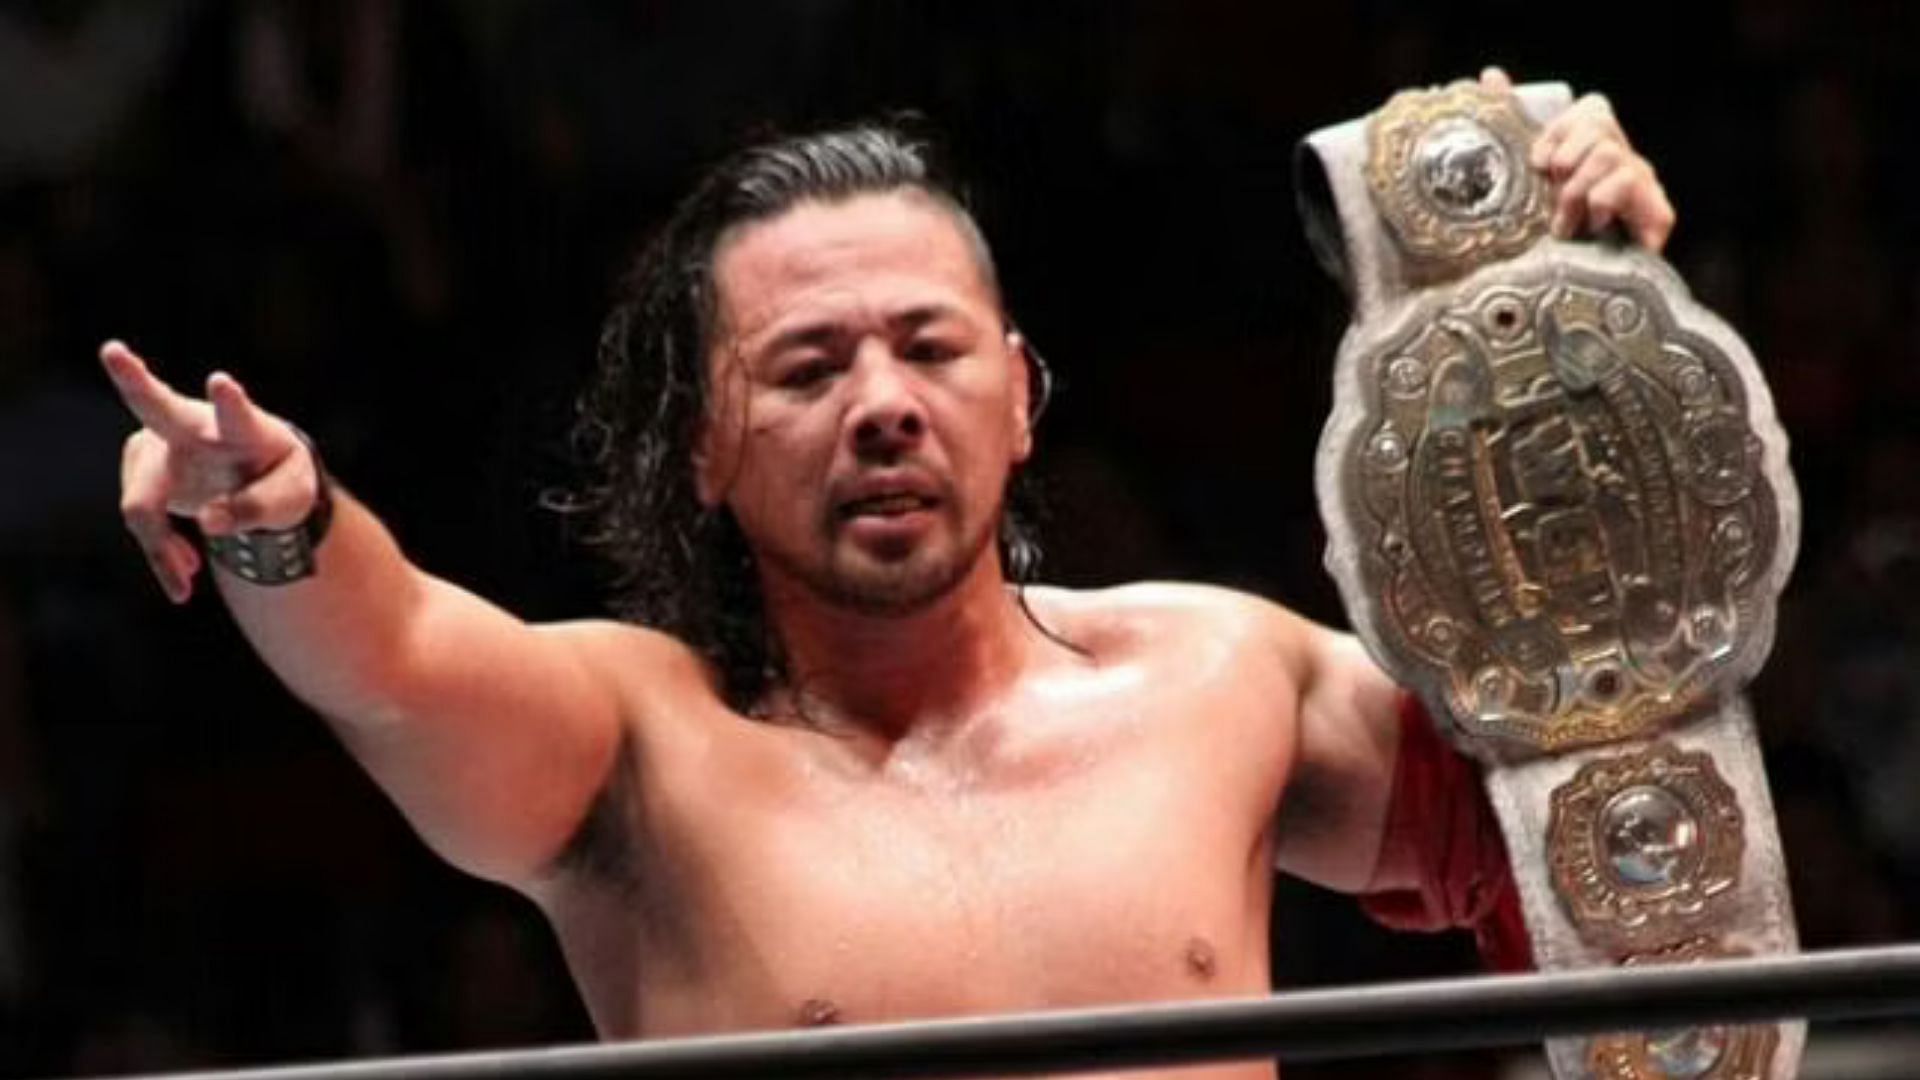 Will the greatest IWGP IC Champion bounce back after a slow start on the WWE main roster?